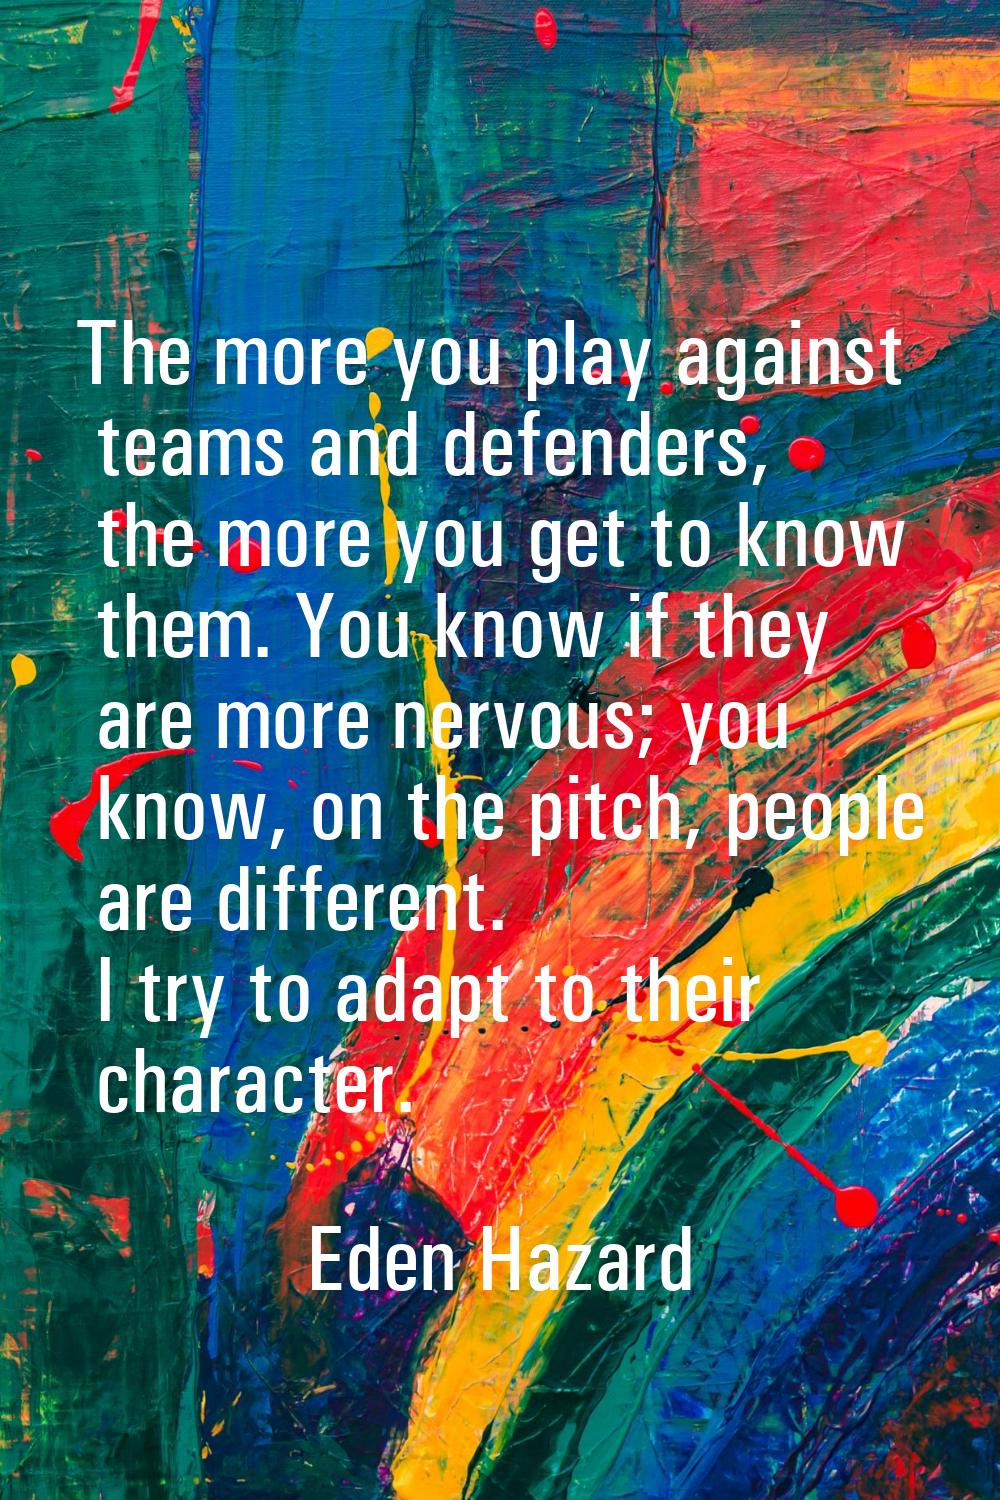 The more you play against teams and defenders, the more you get to know them. You know if they are 